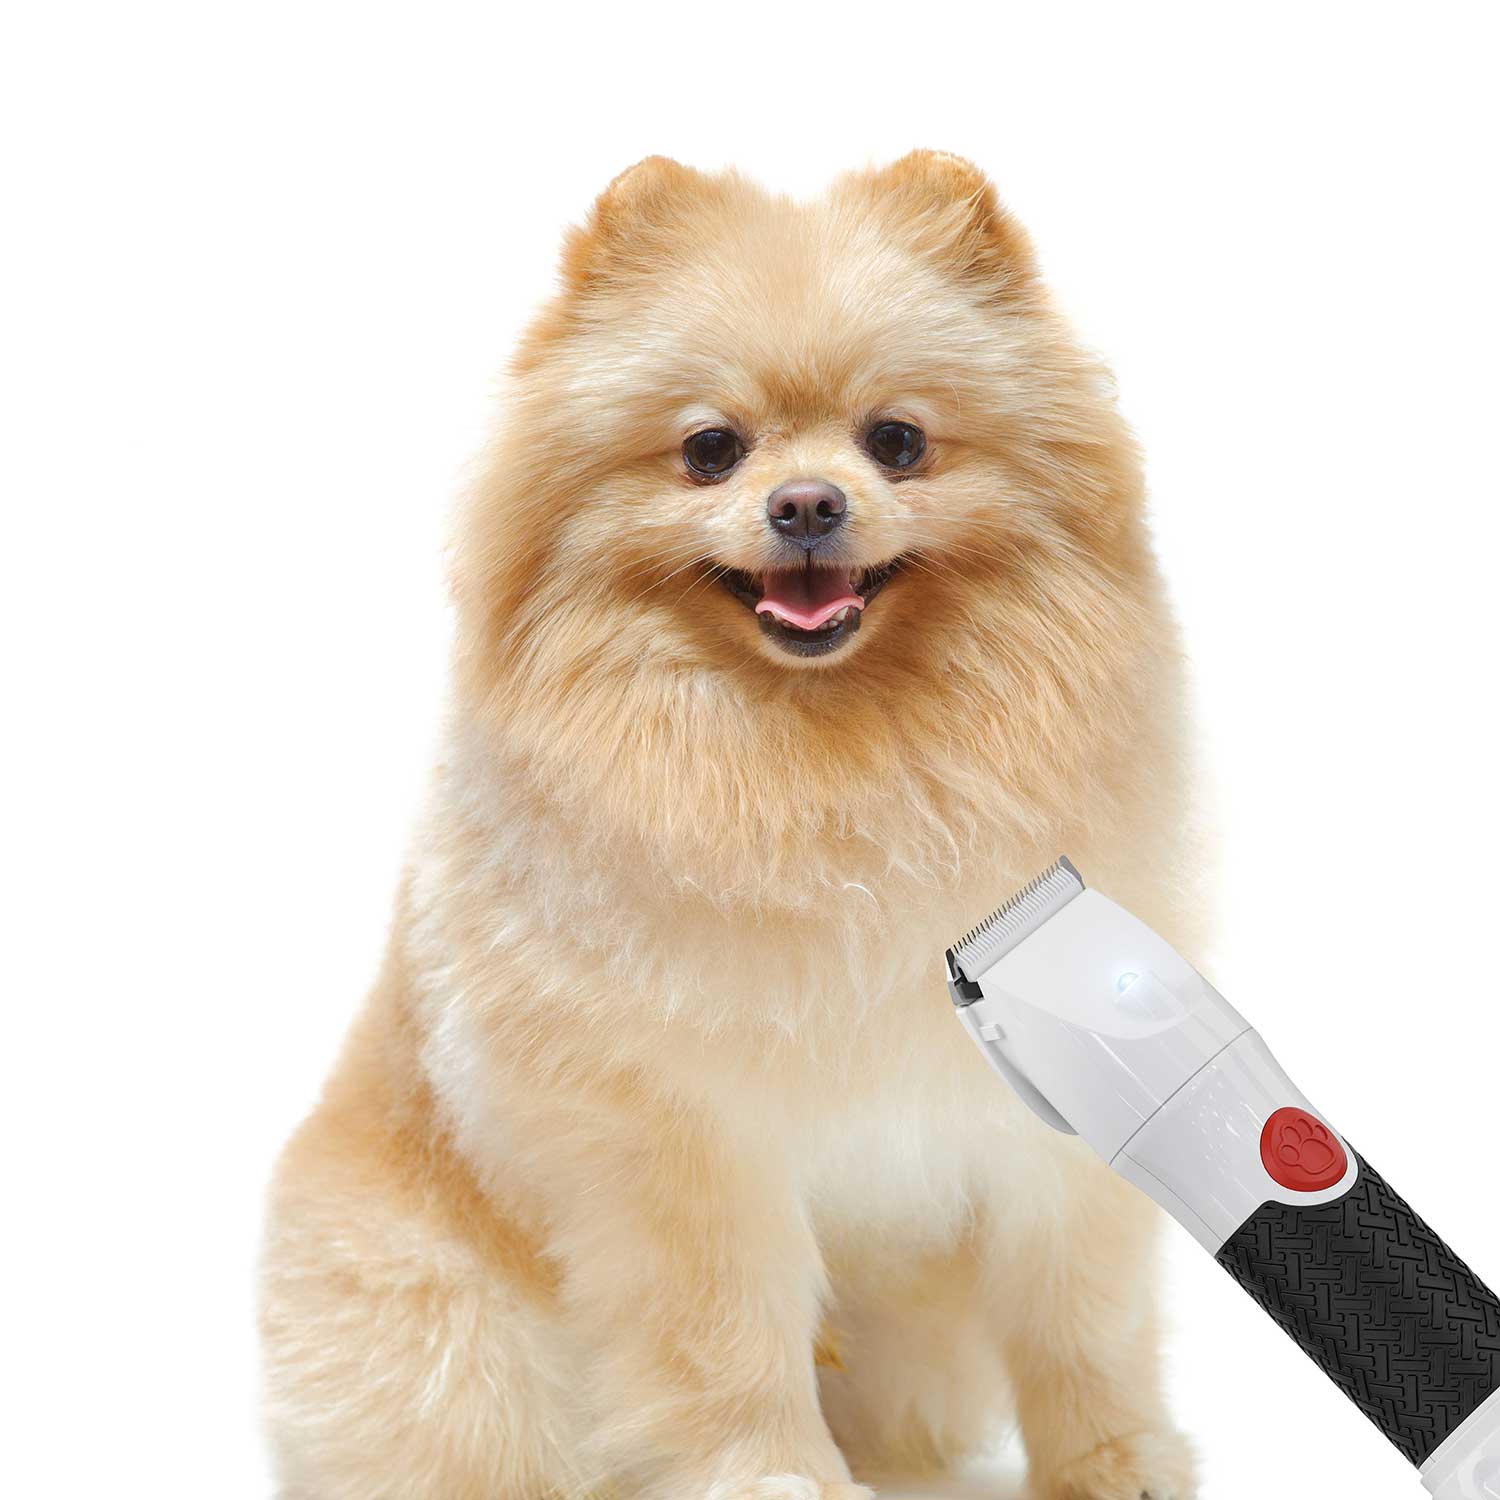 Bell+Howell - Paw Perfect pet hair trimmer. Colour: white